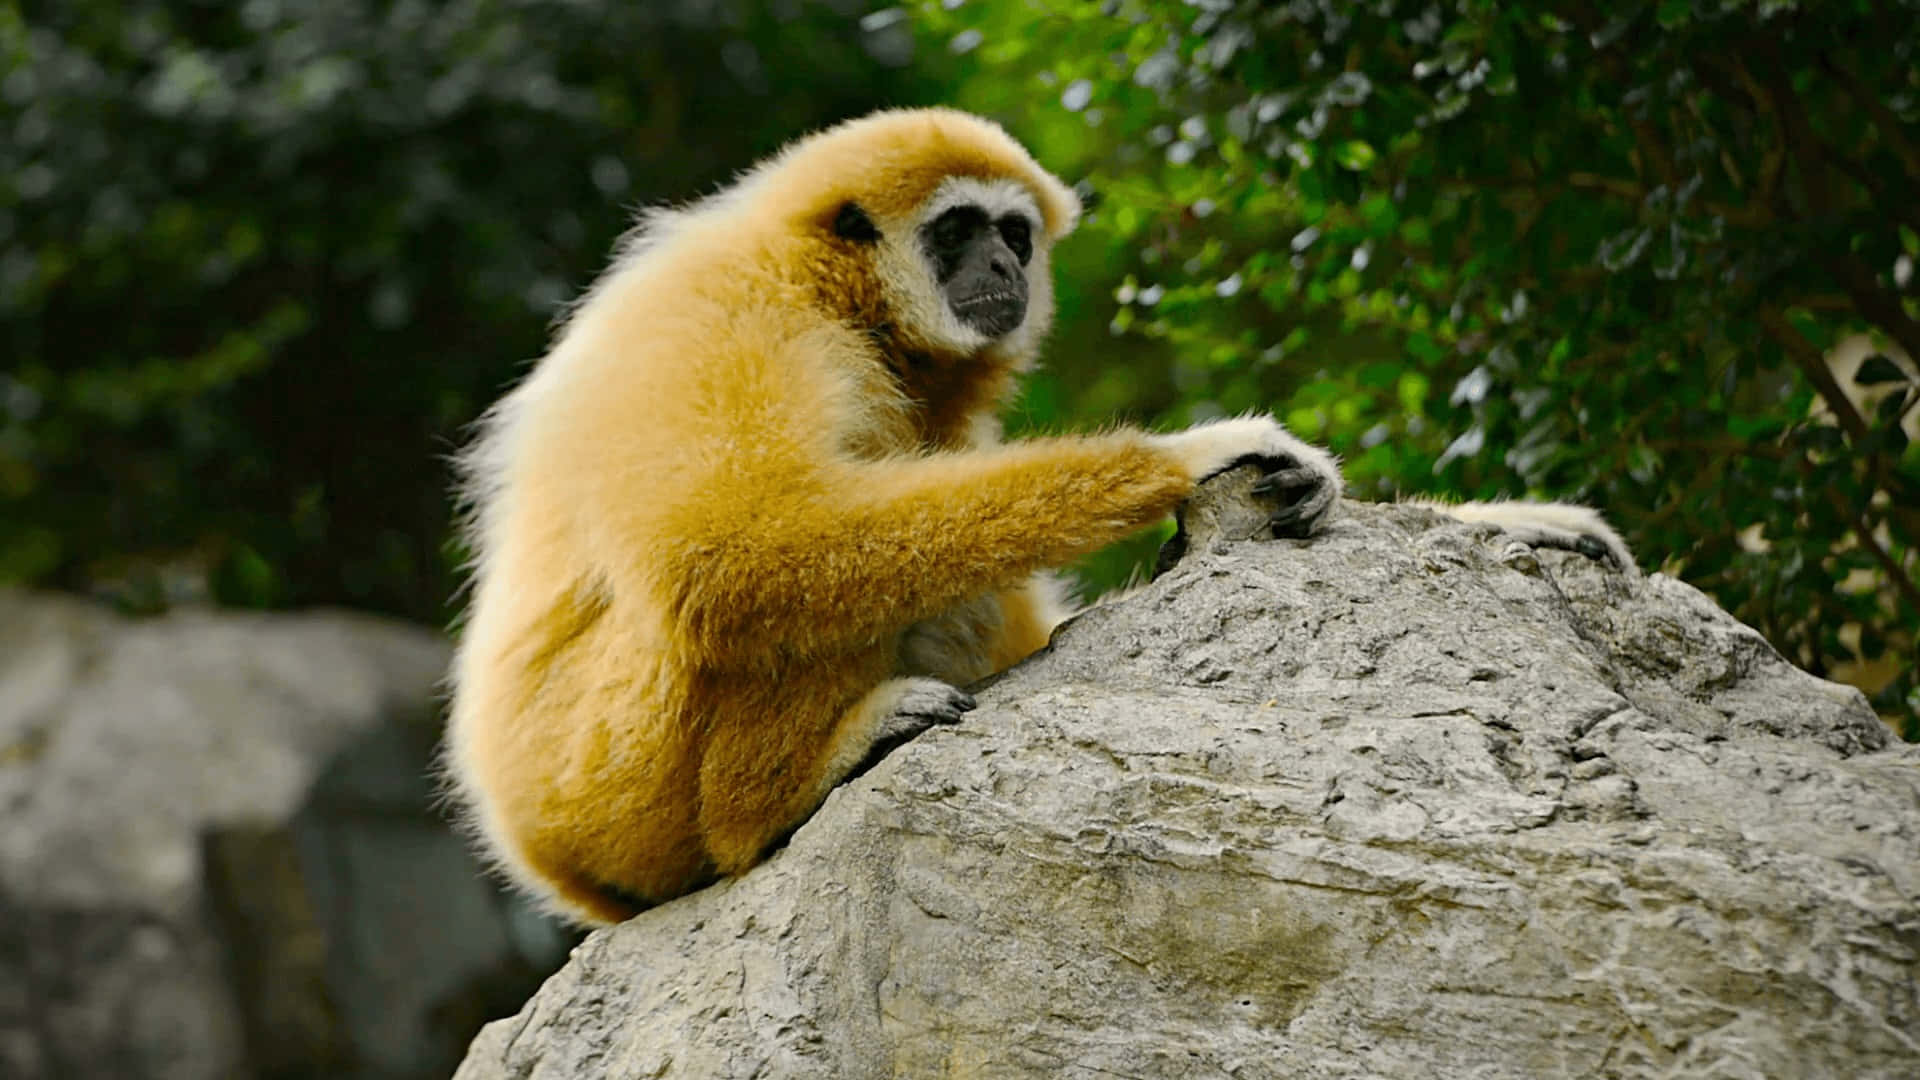 Image  Gibbon in the Rainforest